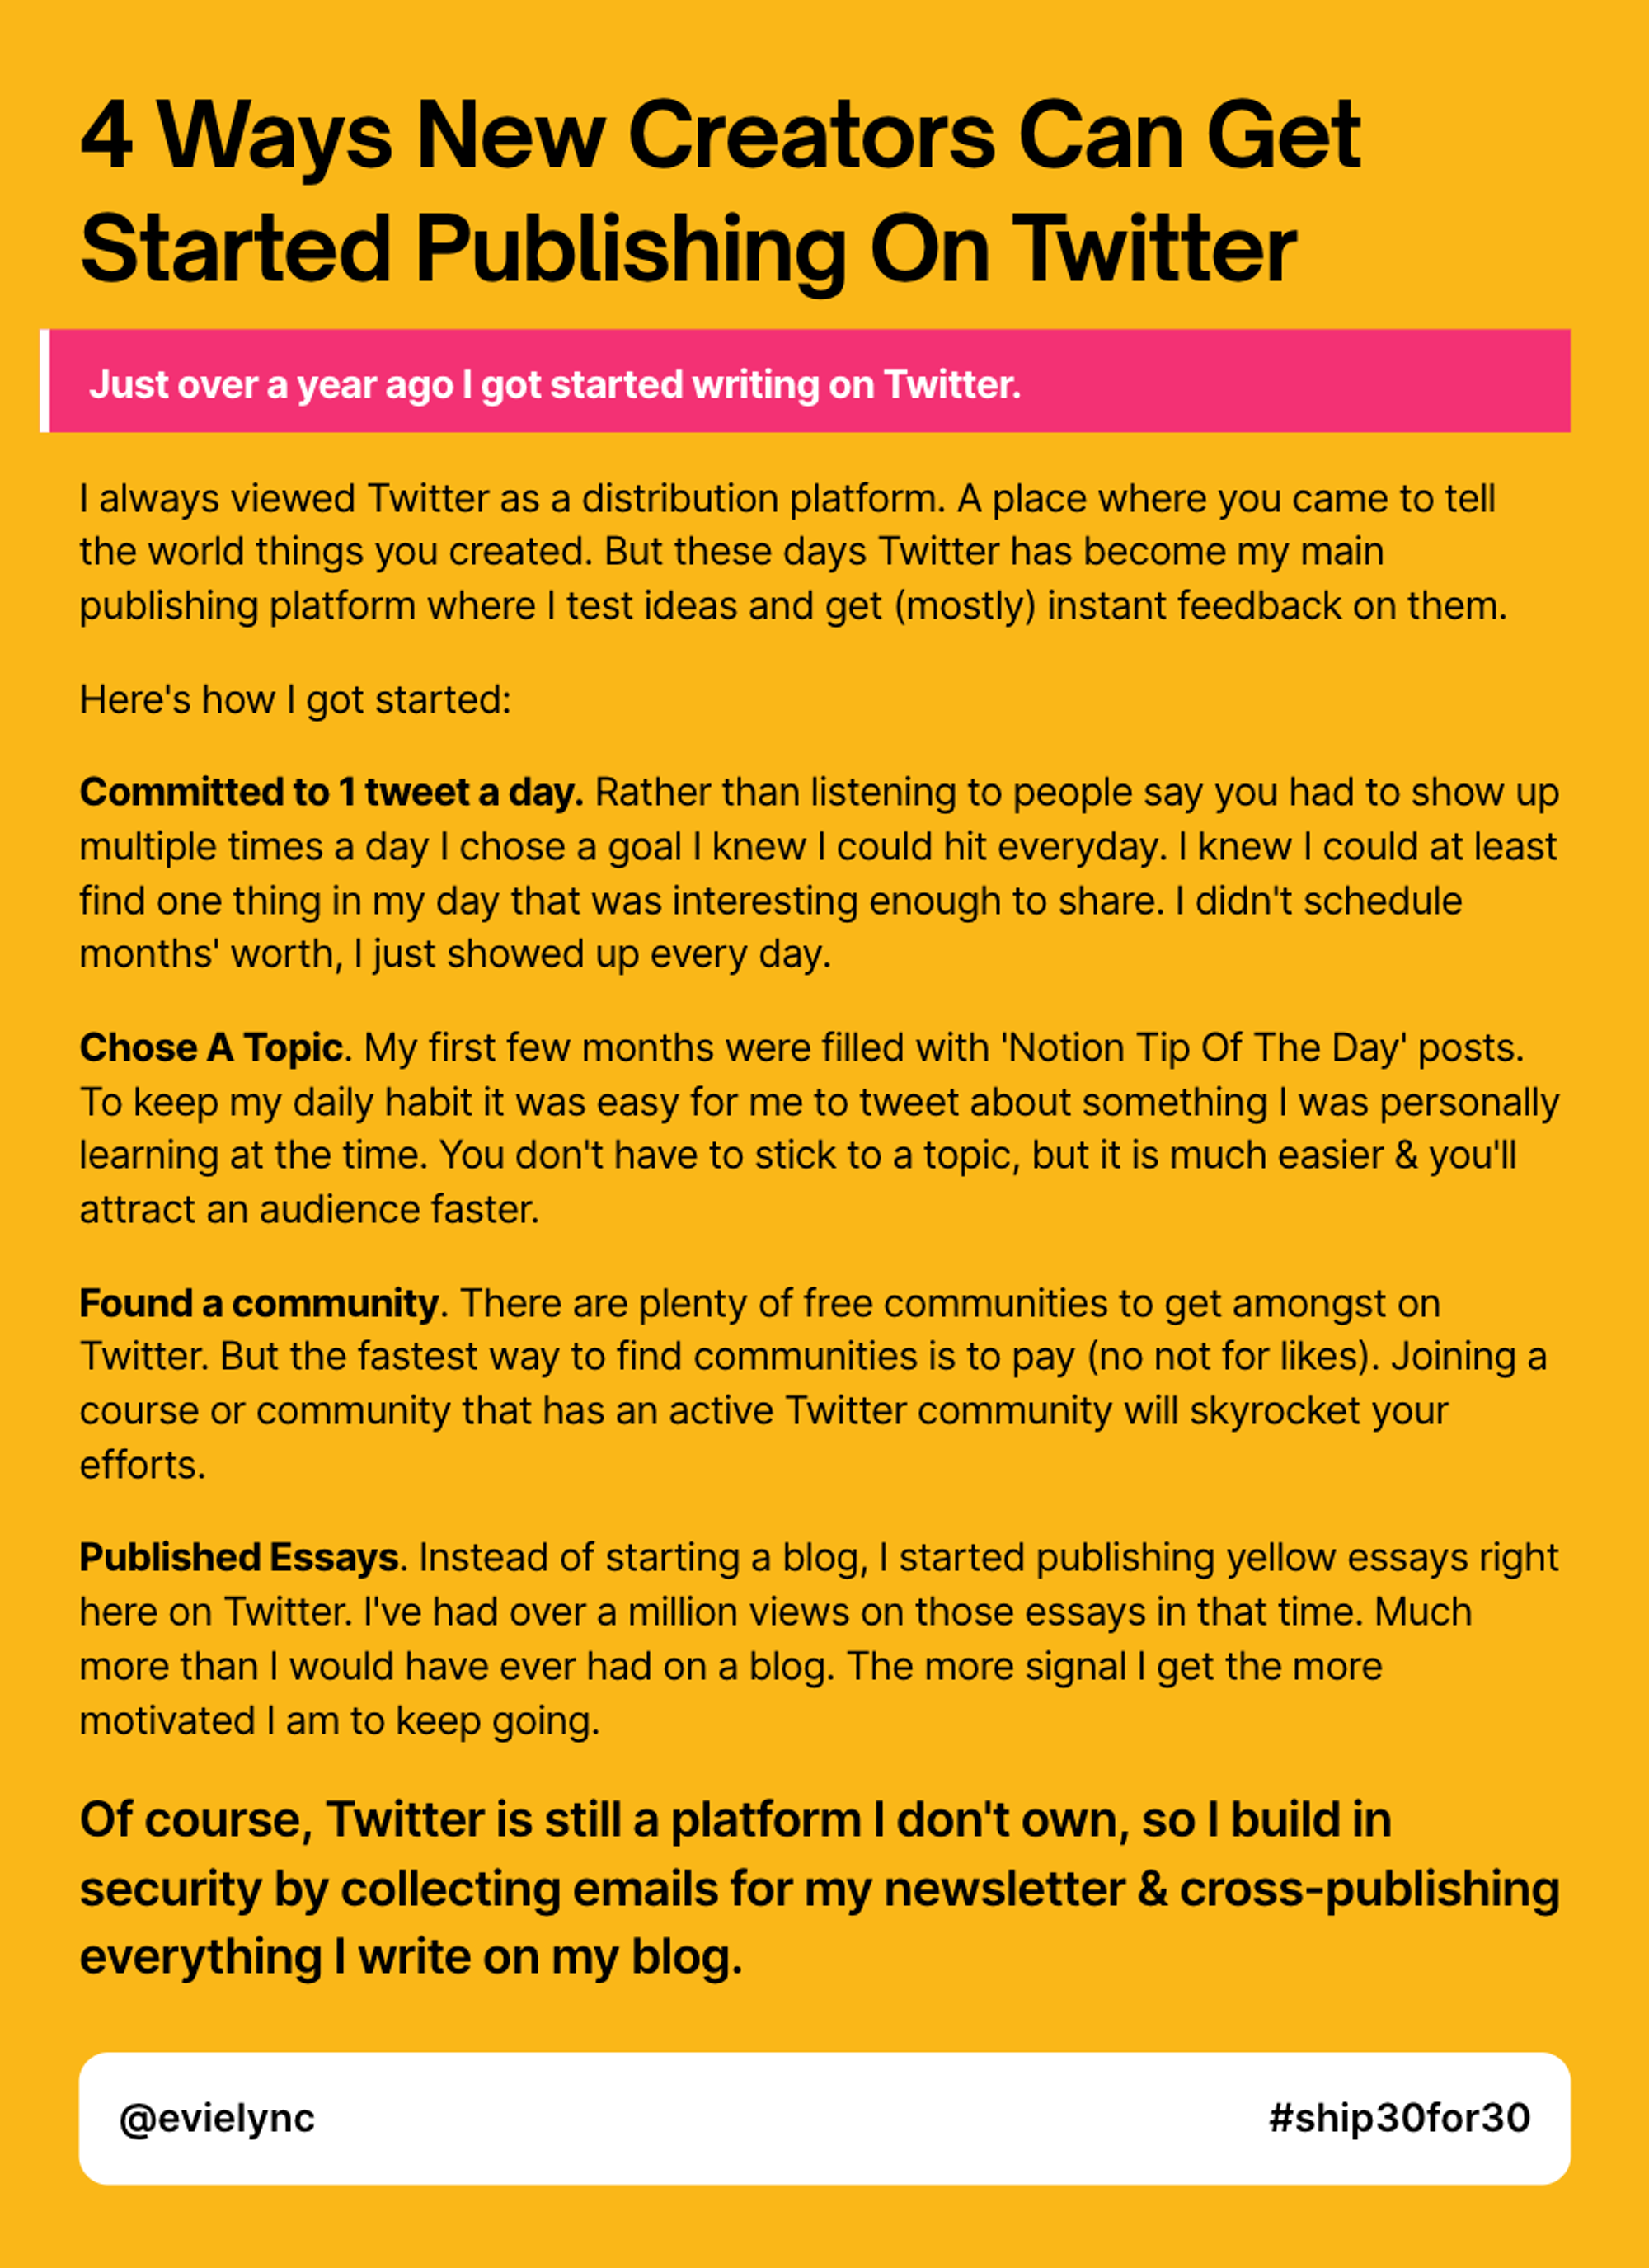 4 Ways New Creators Can Get Started Publishing On Twitter